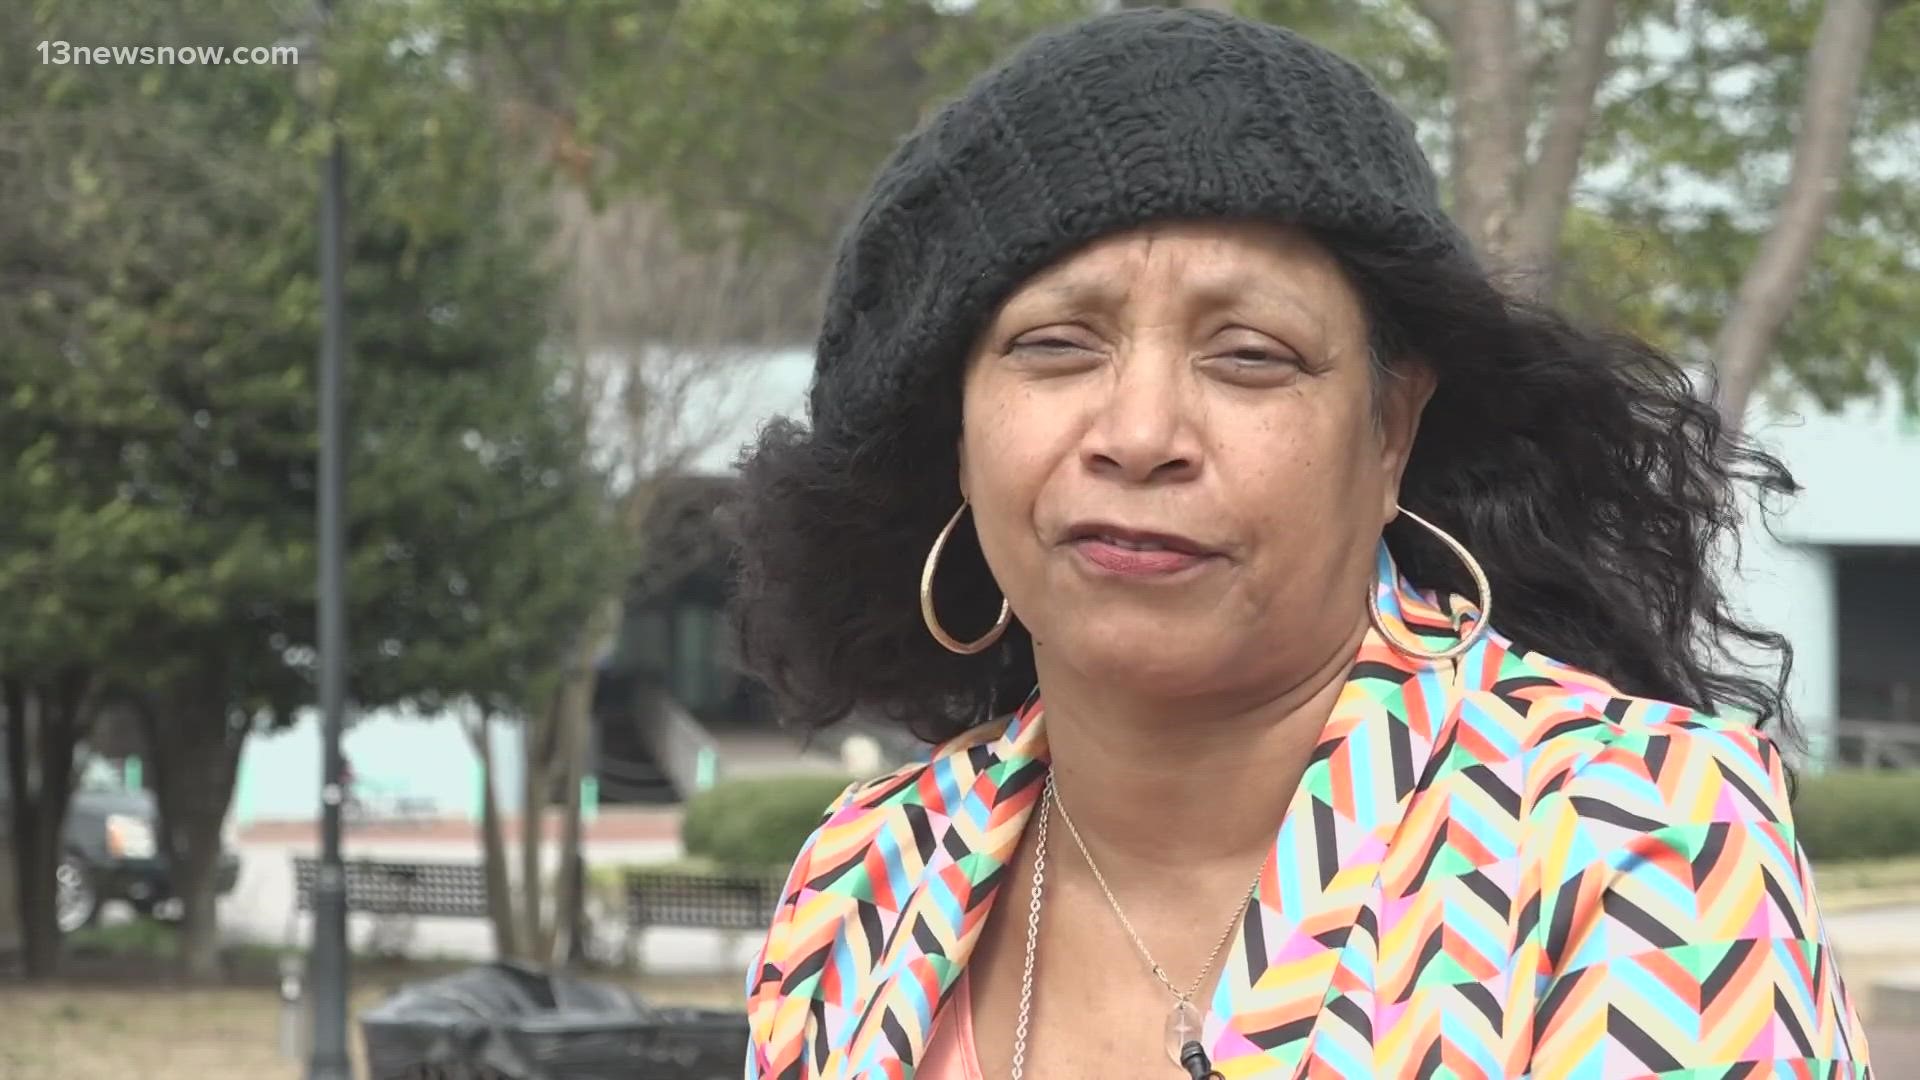 After she lost her job in 2020, Pamela Askew says she filed for unemployment until she randomly stopped receiving her weekly benefits in July 2021.